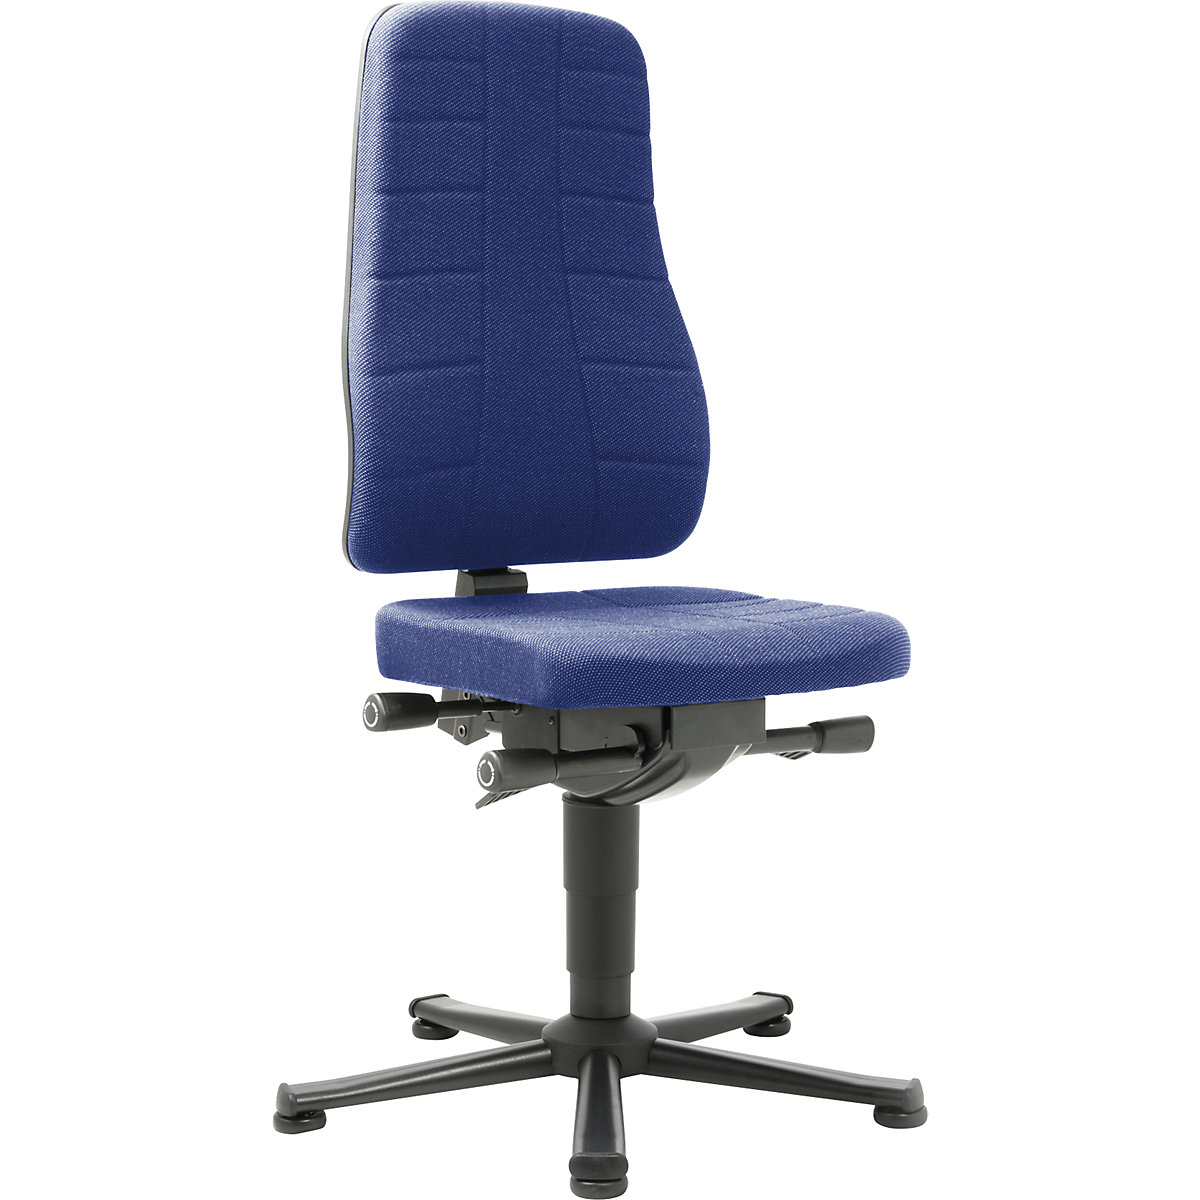 All-in-one industrial swivel chair - bimos